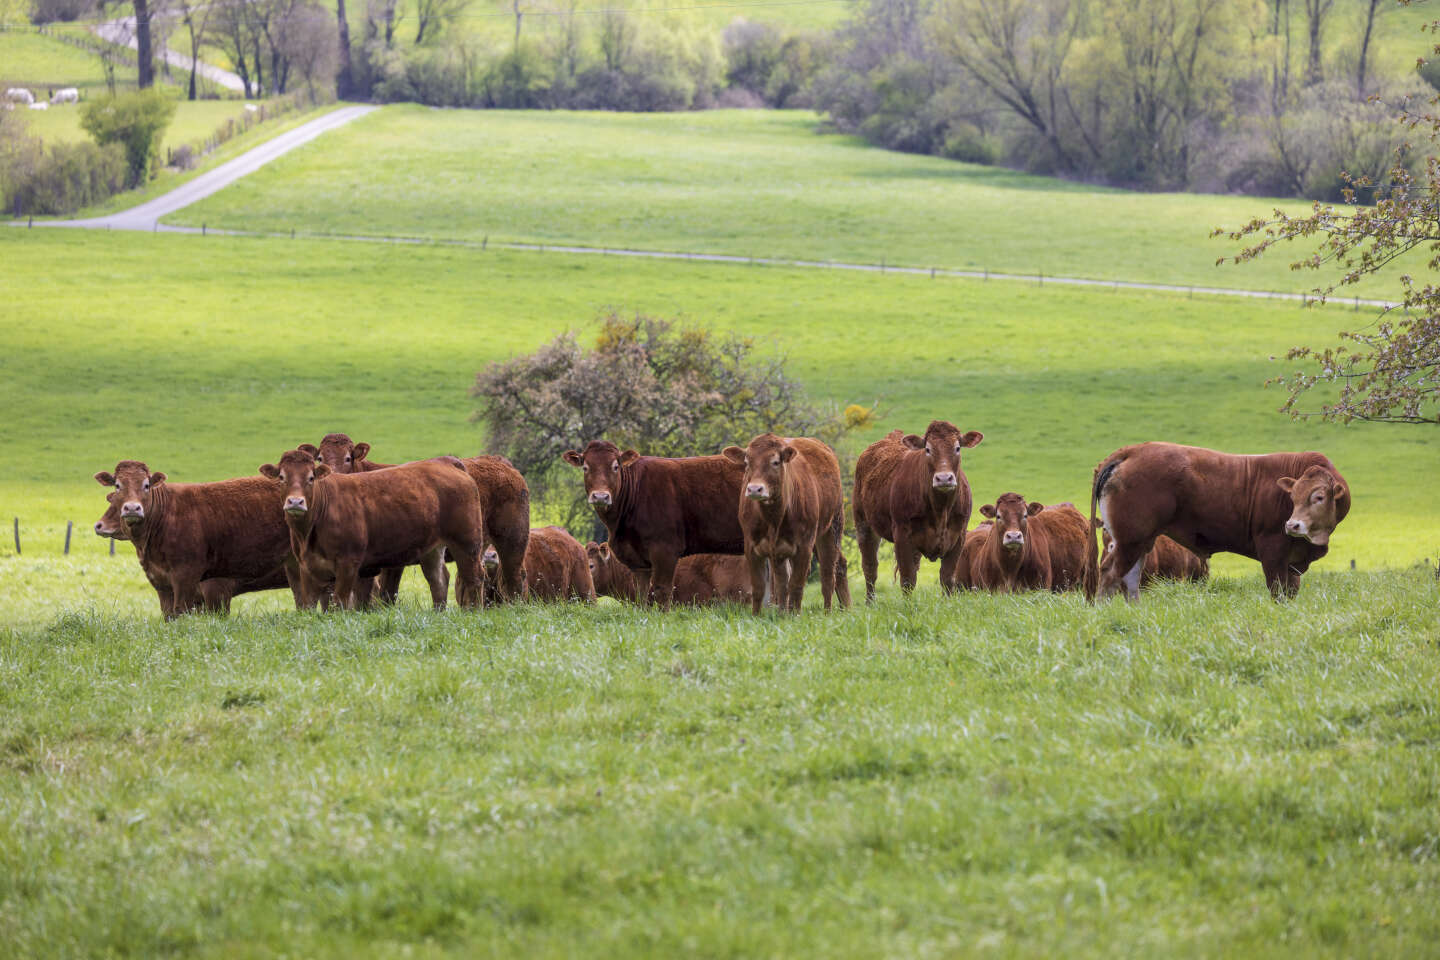 In the agricultural law, environmental orientation is reduced to the bare minimum